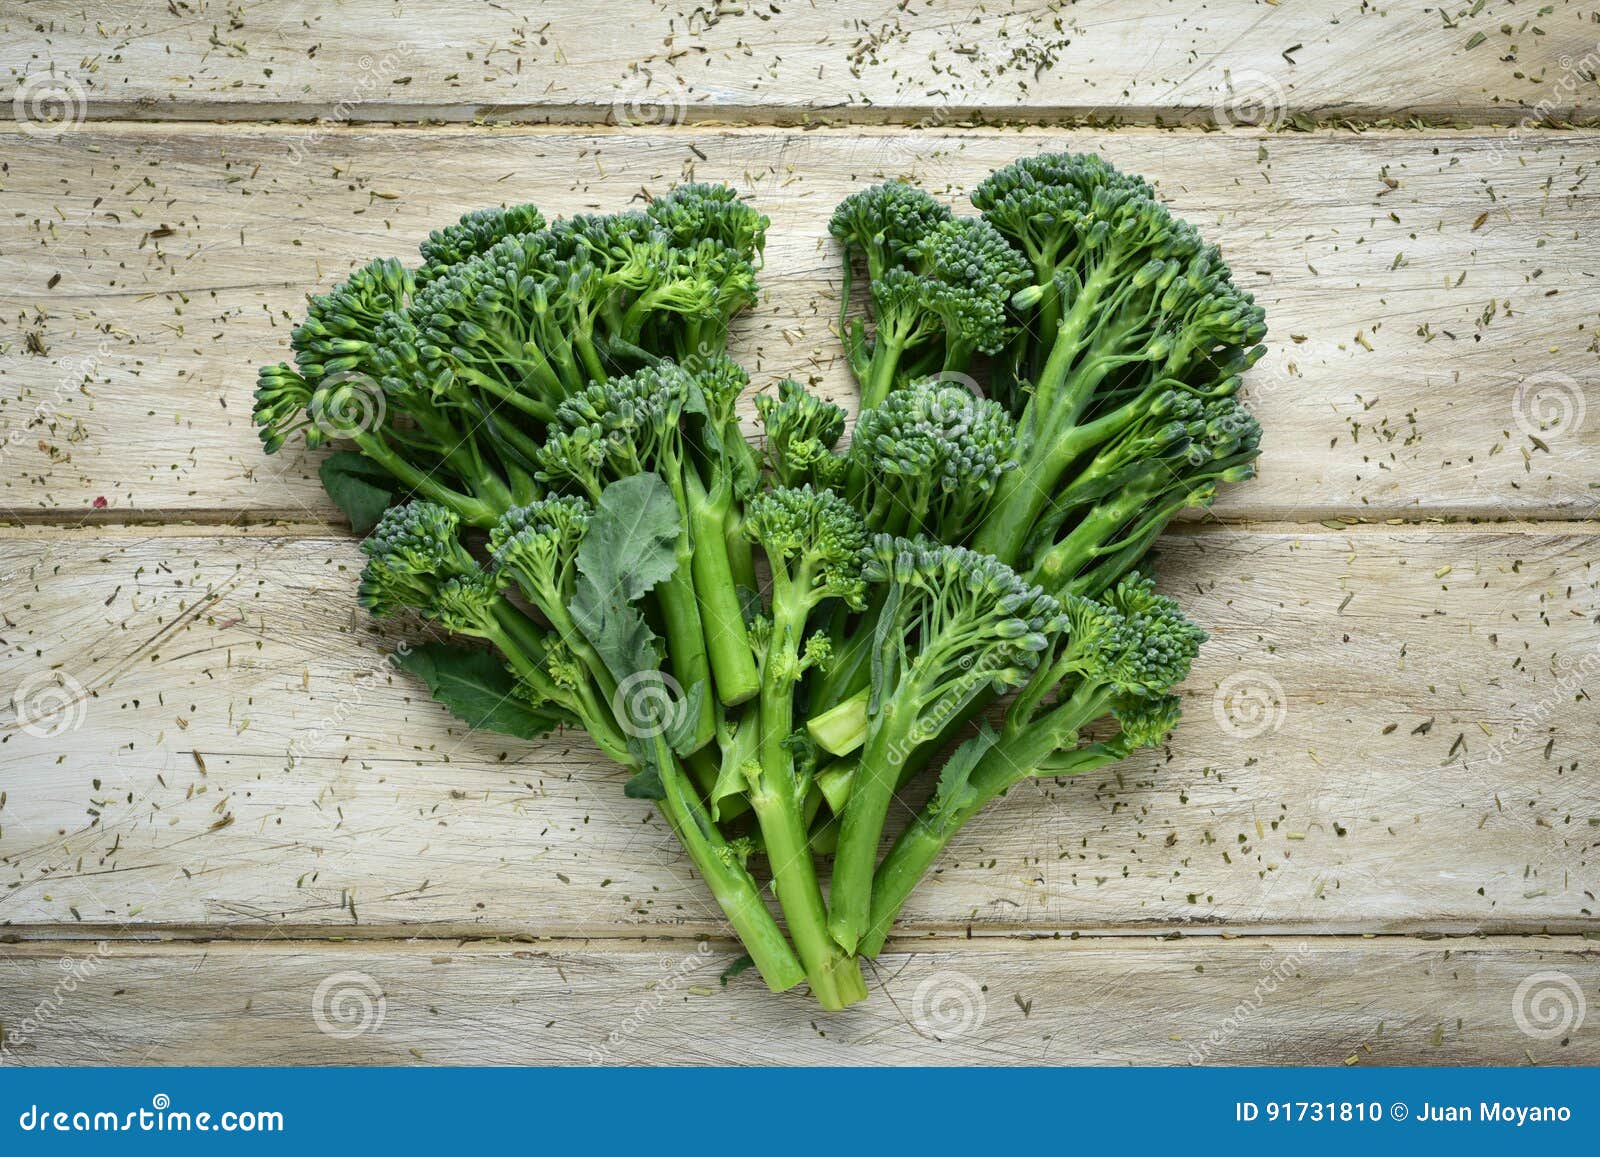 broccolini forming a heart